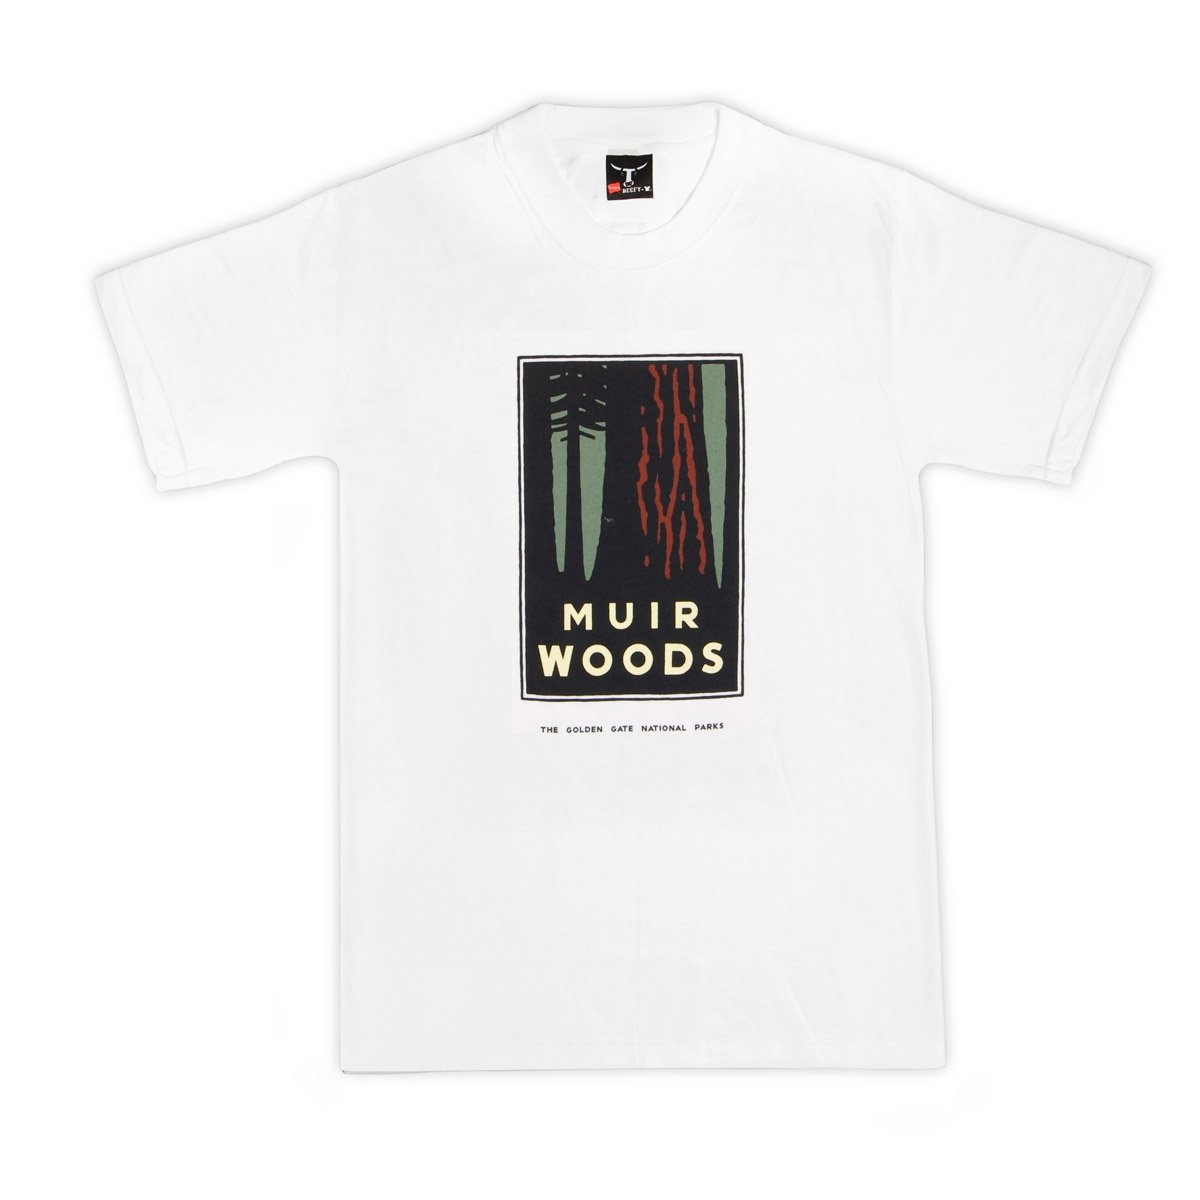 White kids t-shirt with colorful screen-printed Muir Woods design on chest. Artwork by Michael Schwab.